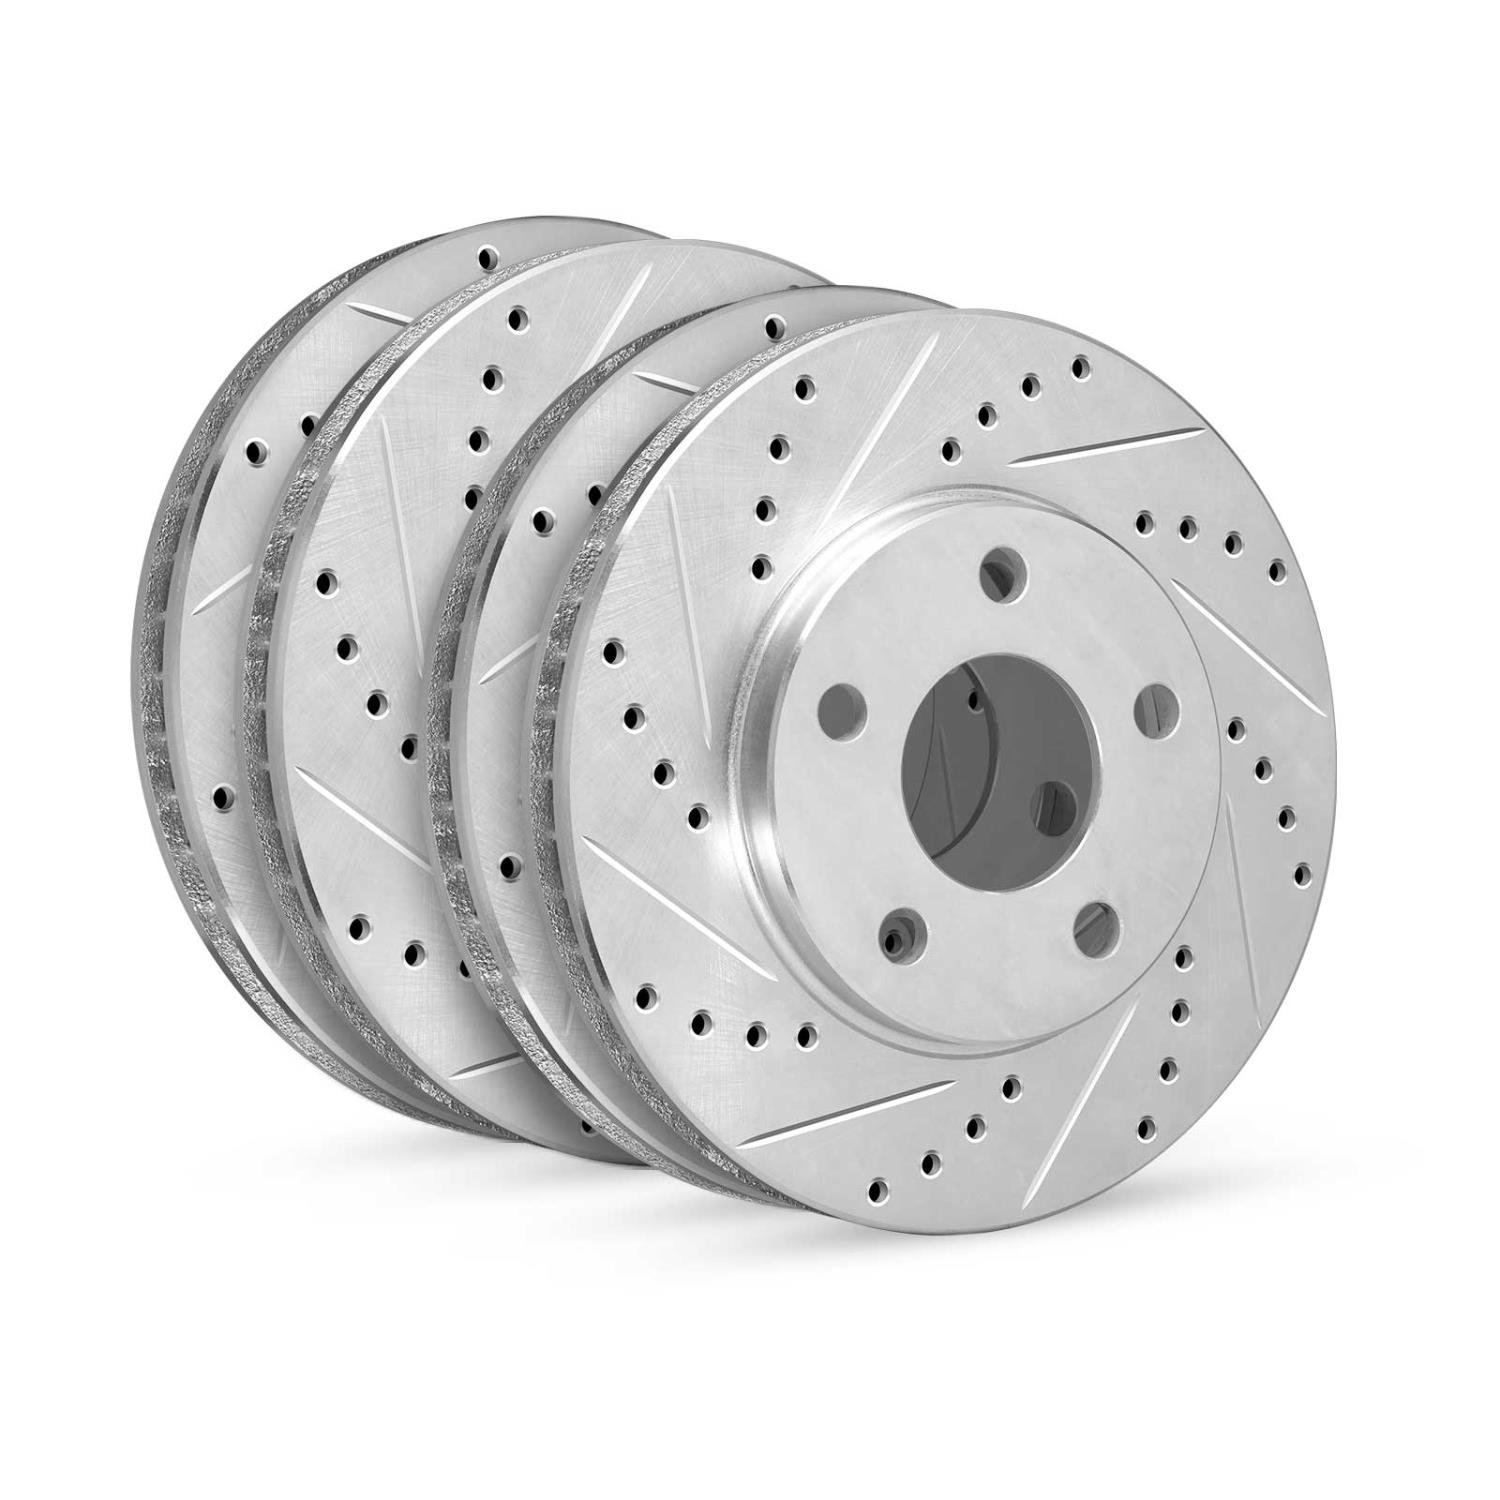 E-Line Drilled & Slotted Silver Brake Rotor & Drum Set, Fits Select Fits Multiple Makes/Models, Position: Front & Rear